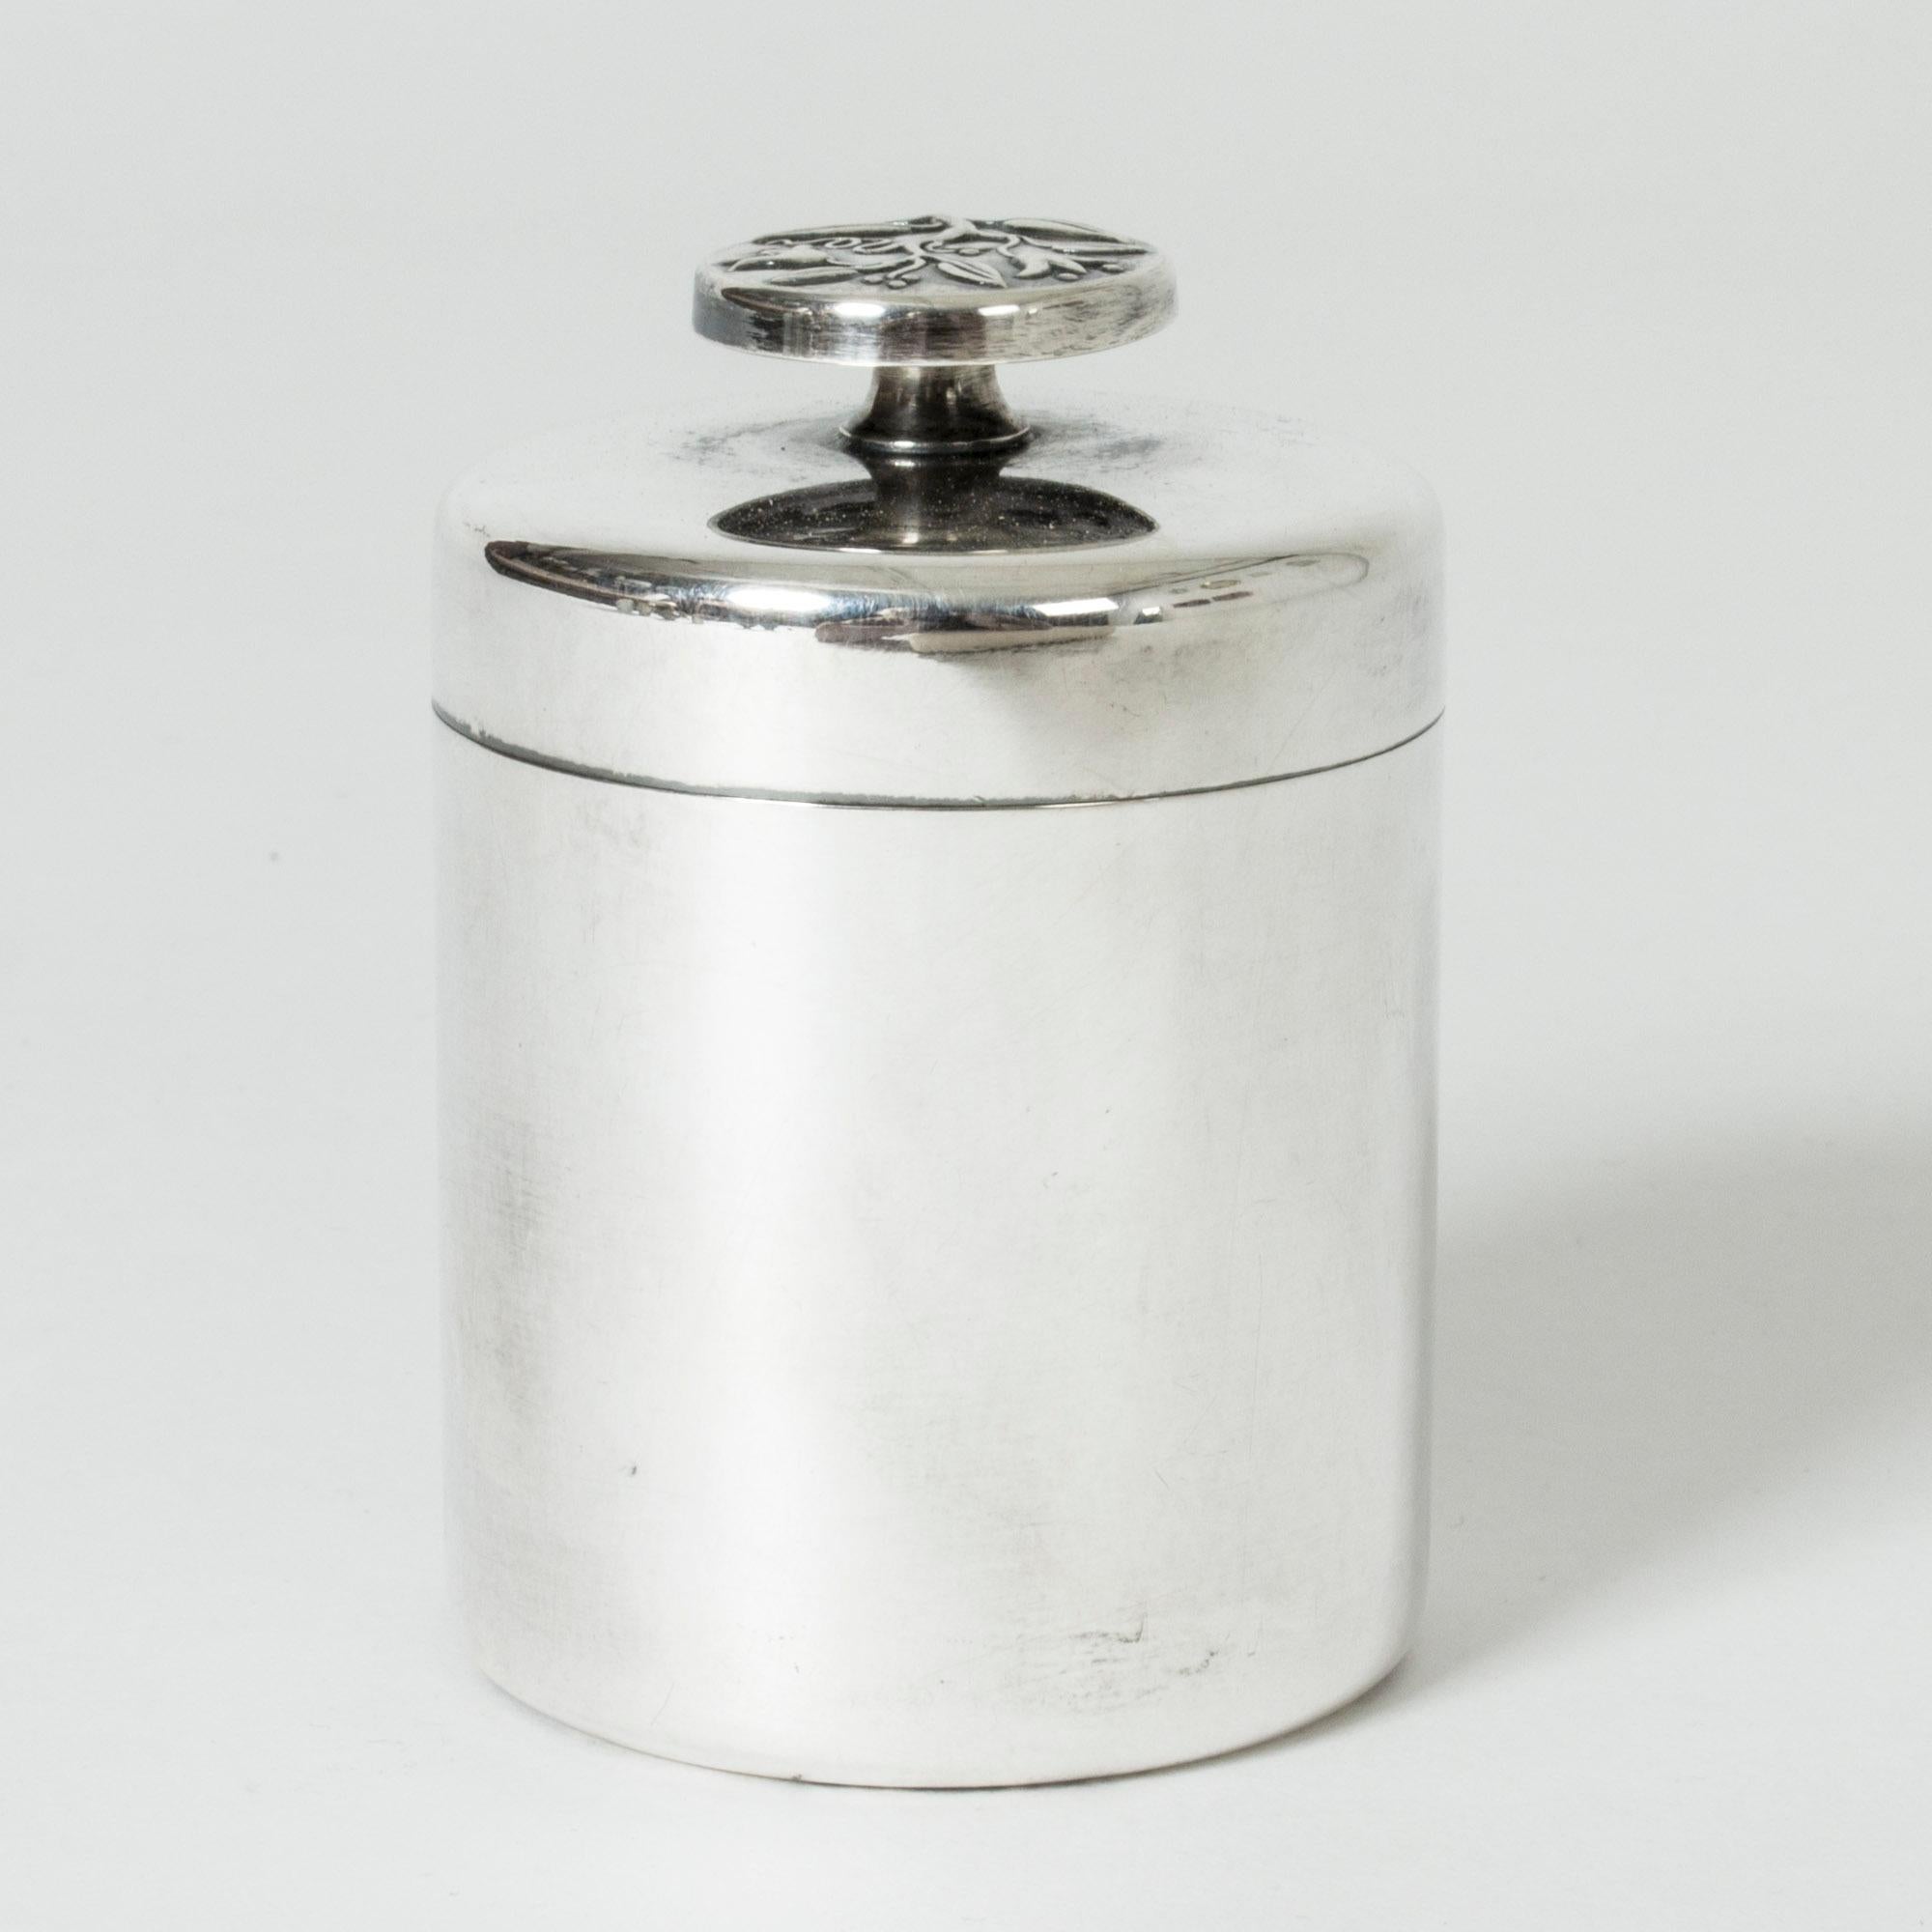 Sleek silver jar from GAB, with a beautiful flower decor on the knob. Art Nouveau inspired decoration subtly embossed on the flat, spherical knob.